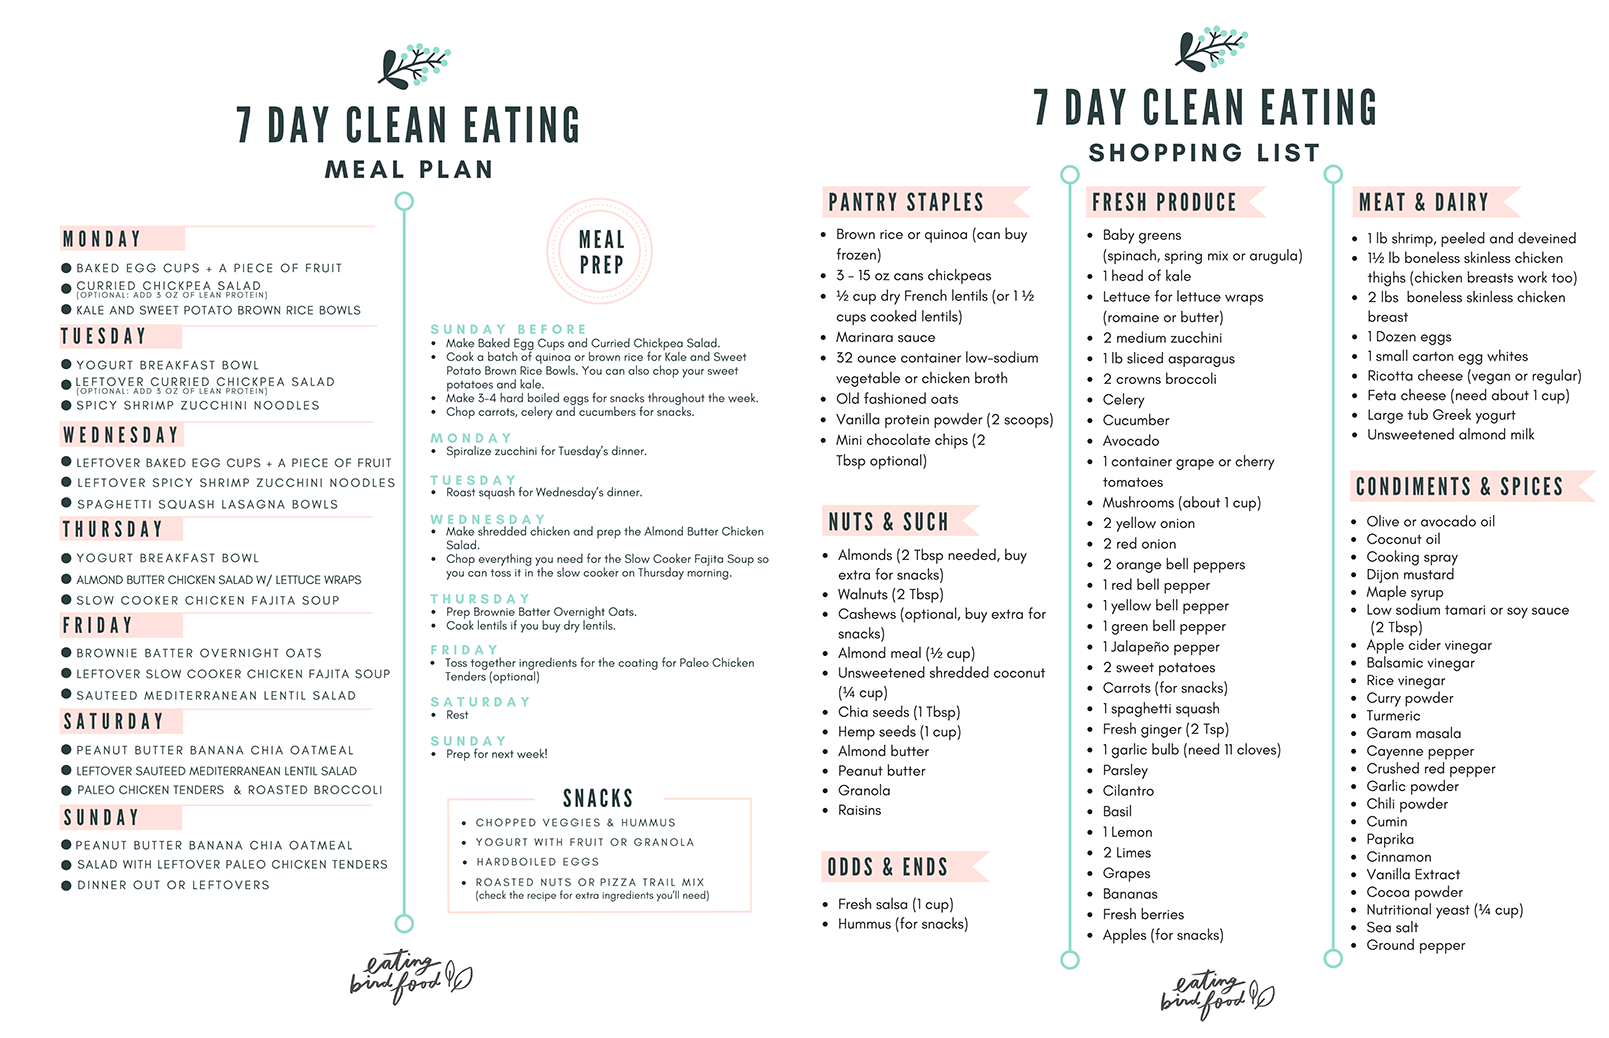 Healthy Eating Meal Plan Shopping List